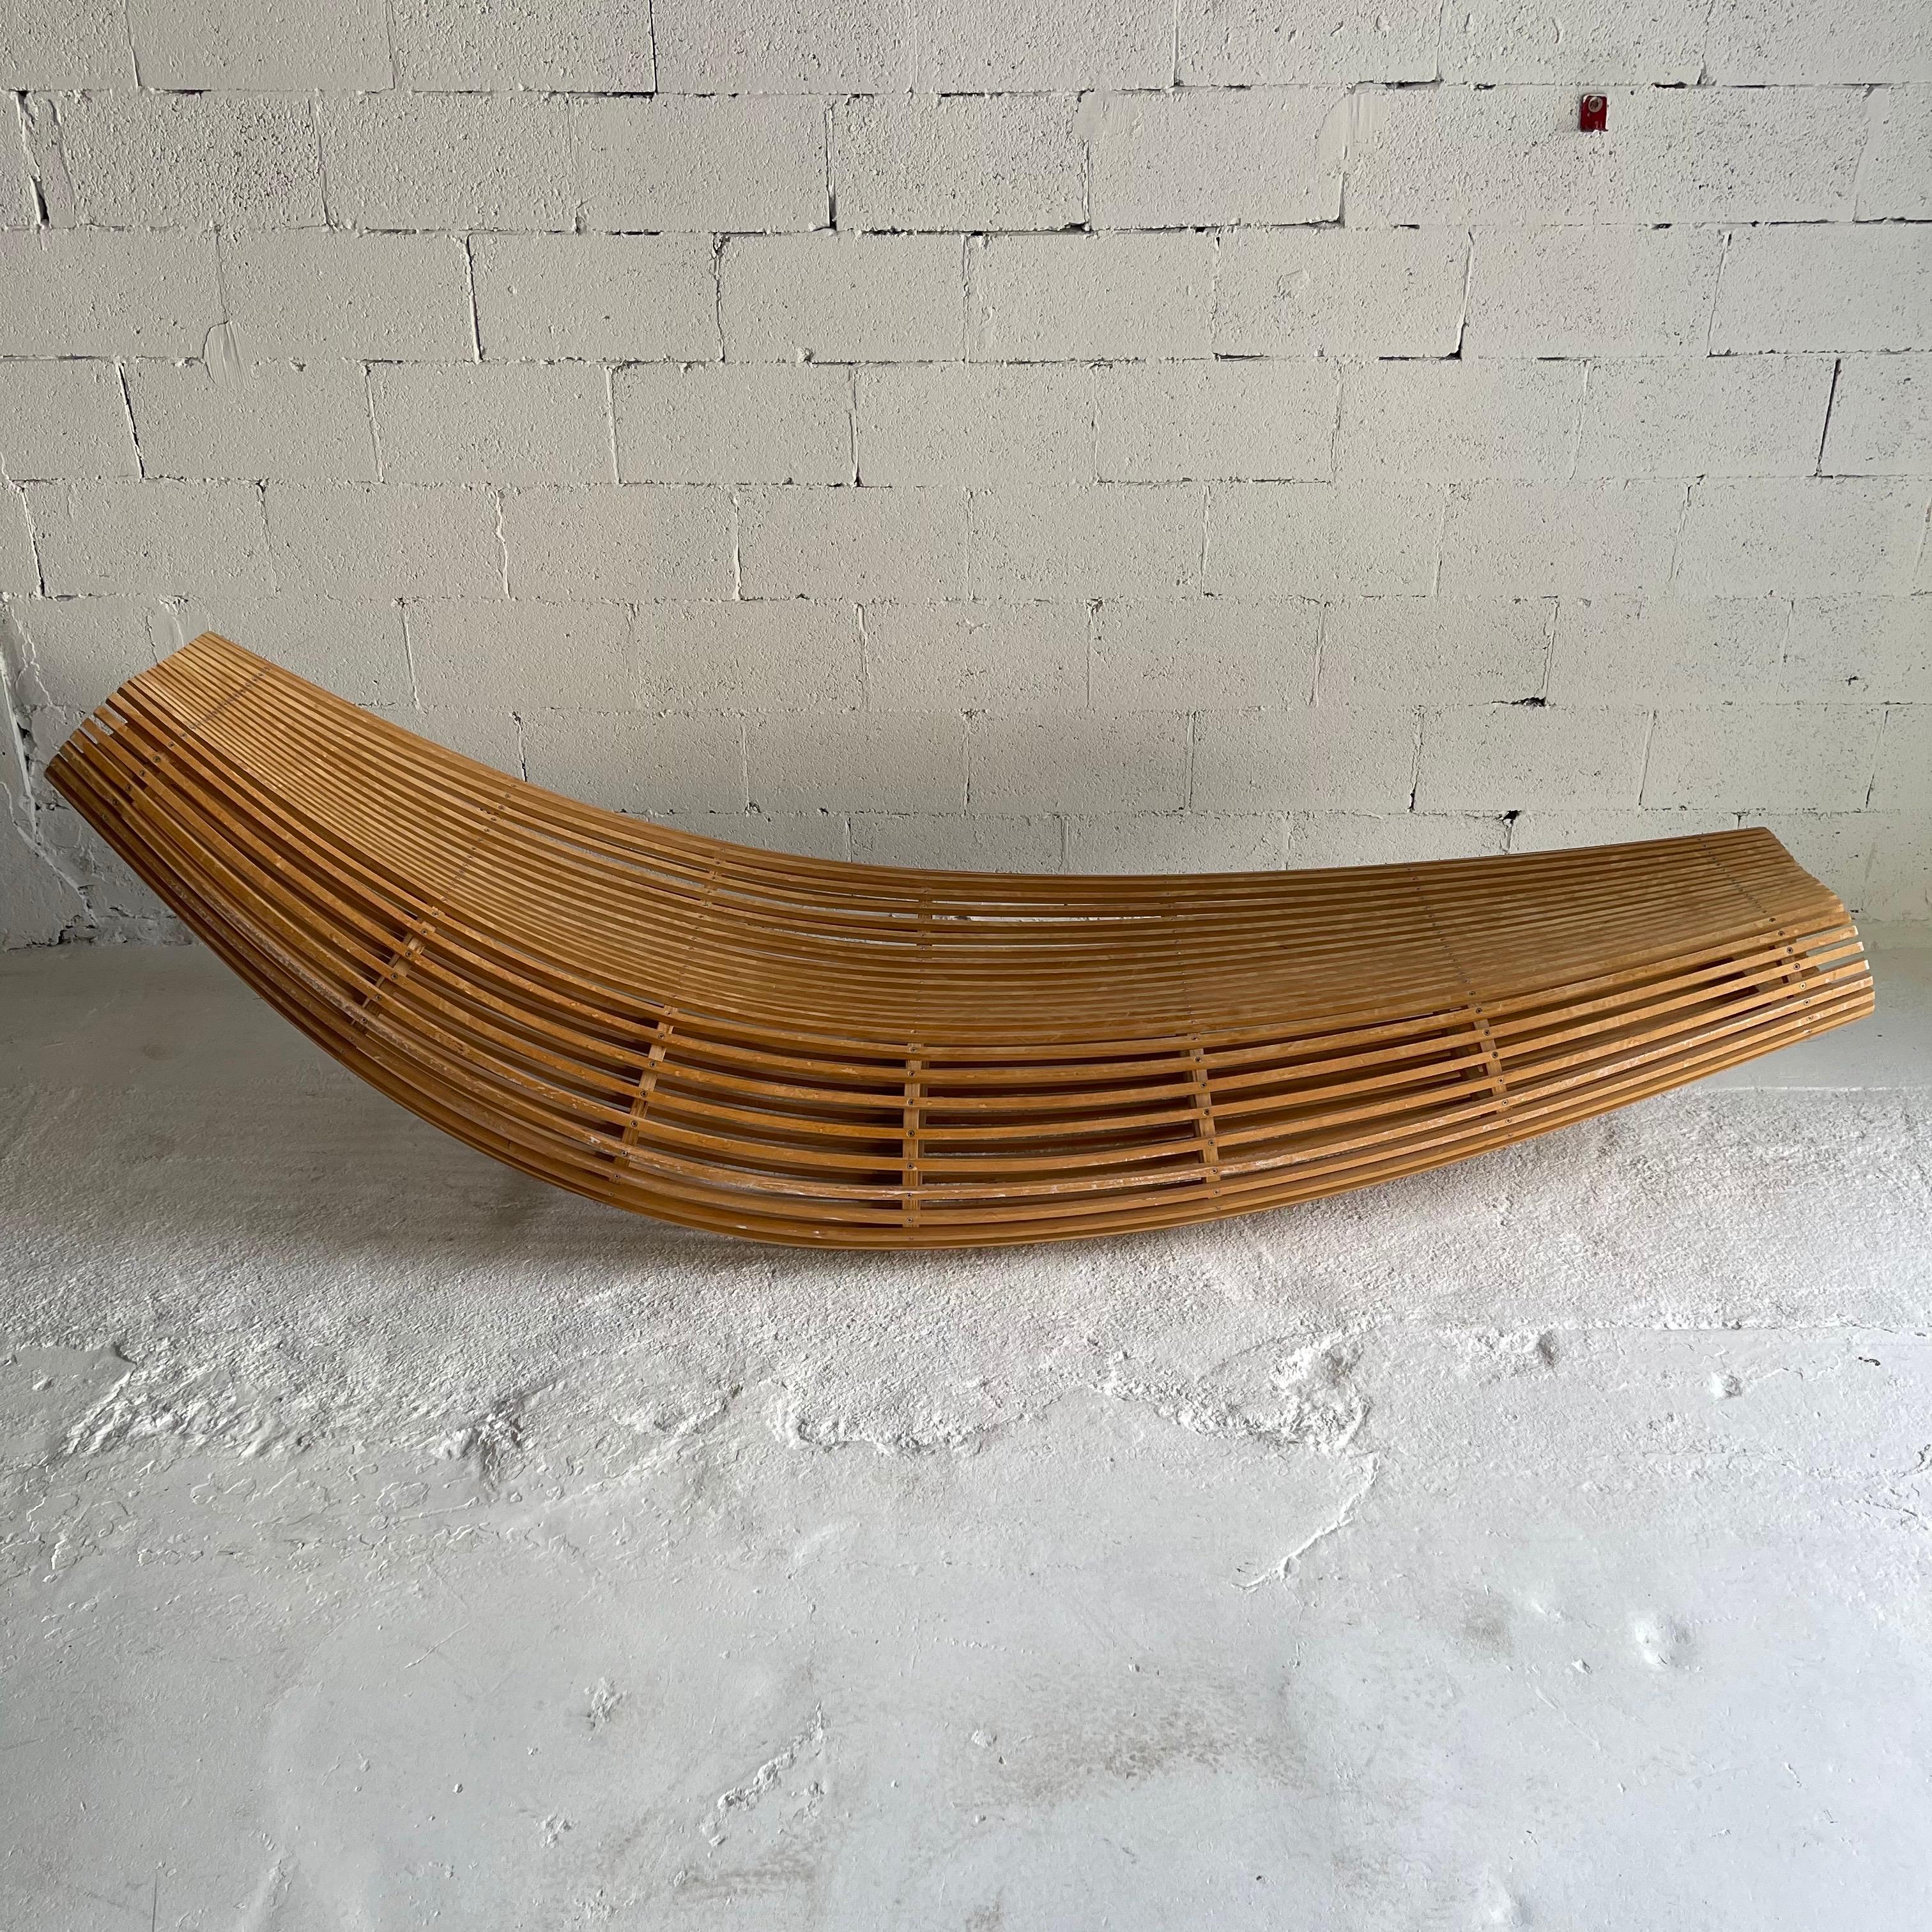 Extremely rare and no longer in production Body Raft Chaise Lounge by David Trubirdge, constructed of Ash and Hoop Pine. A form that a took over a decade to perfect. Produced in Davids studio in New Zealand in Limited Edition Quantity, and retailed